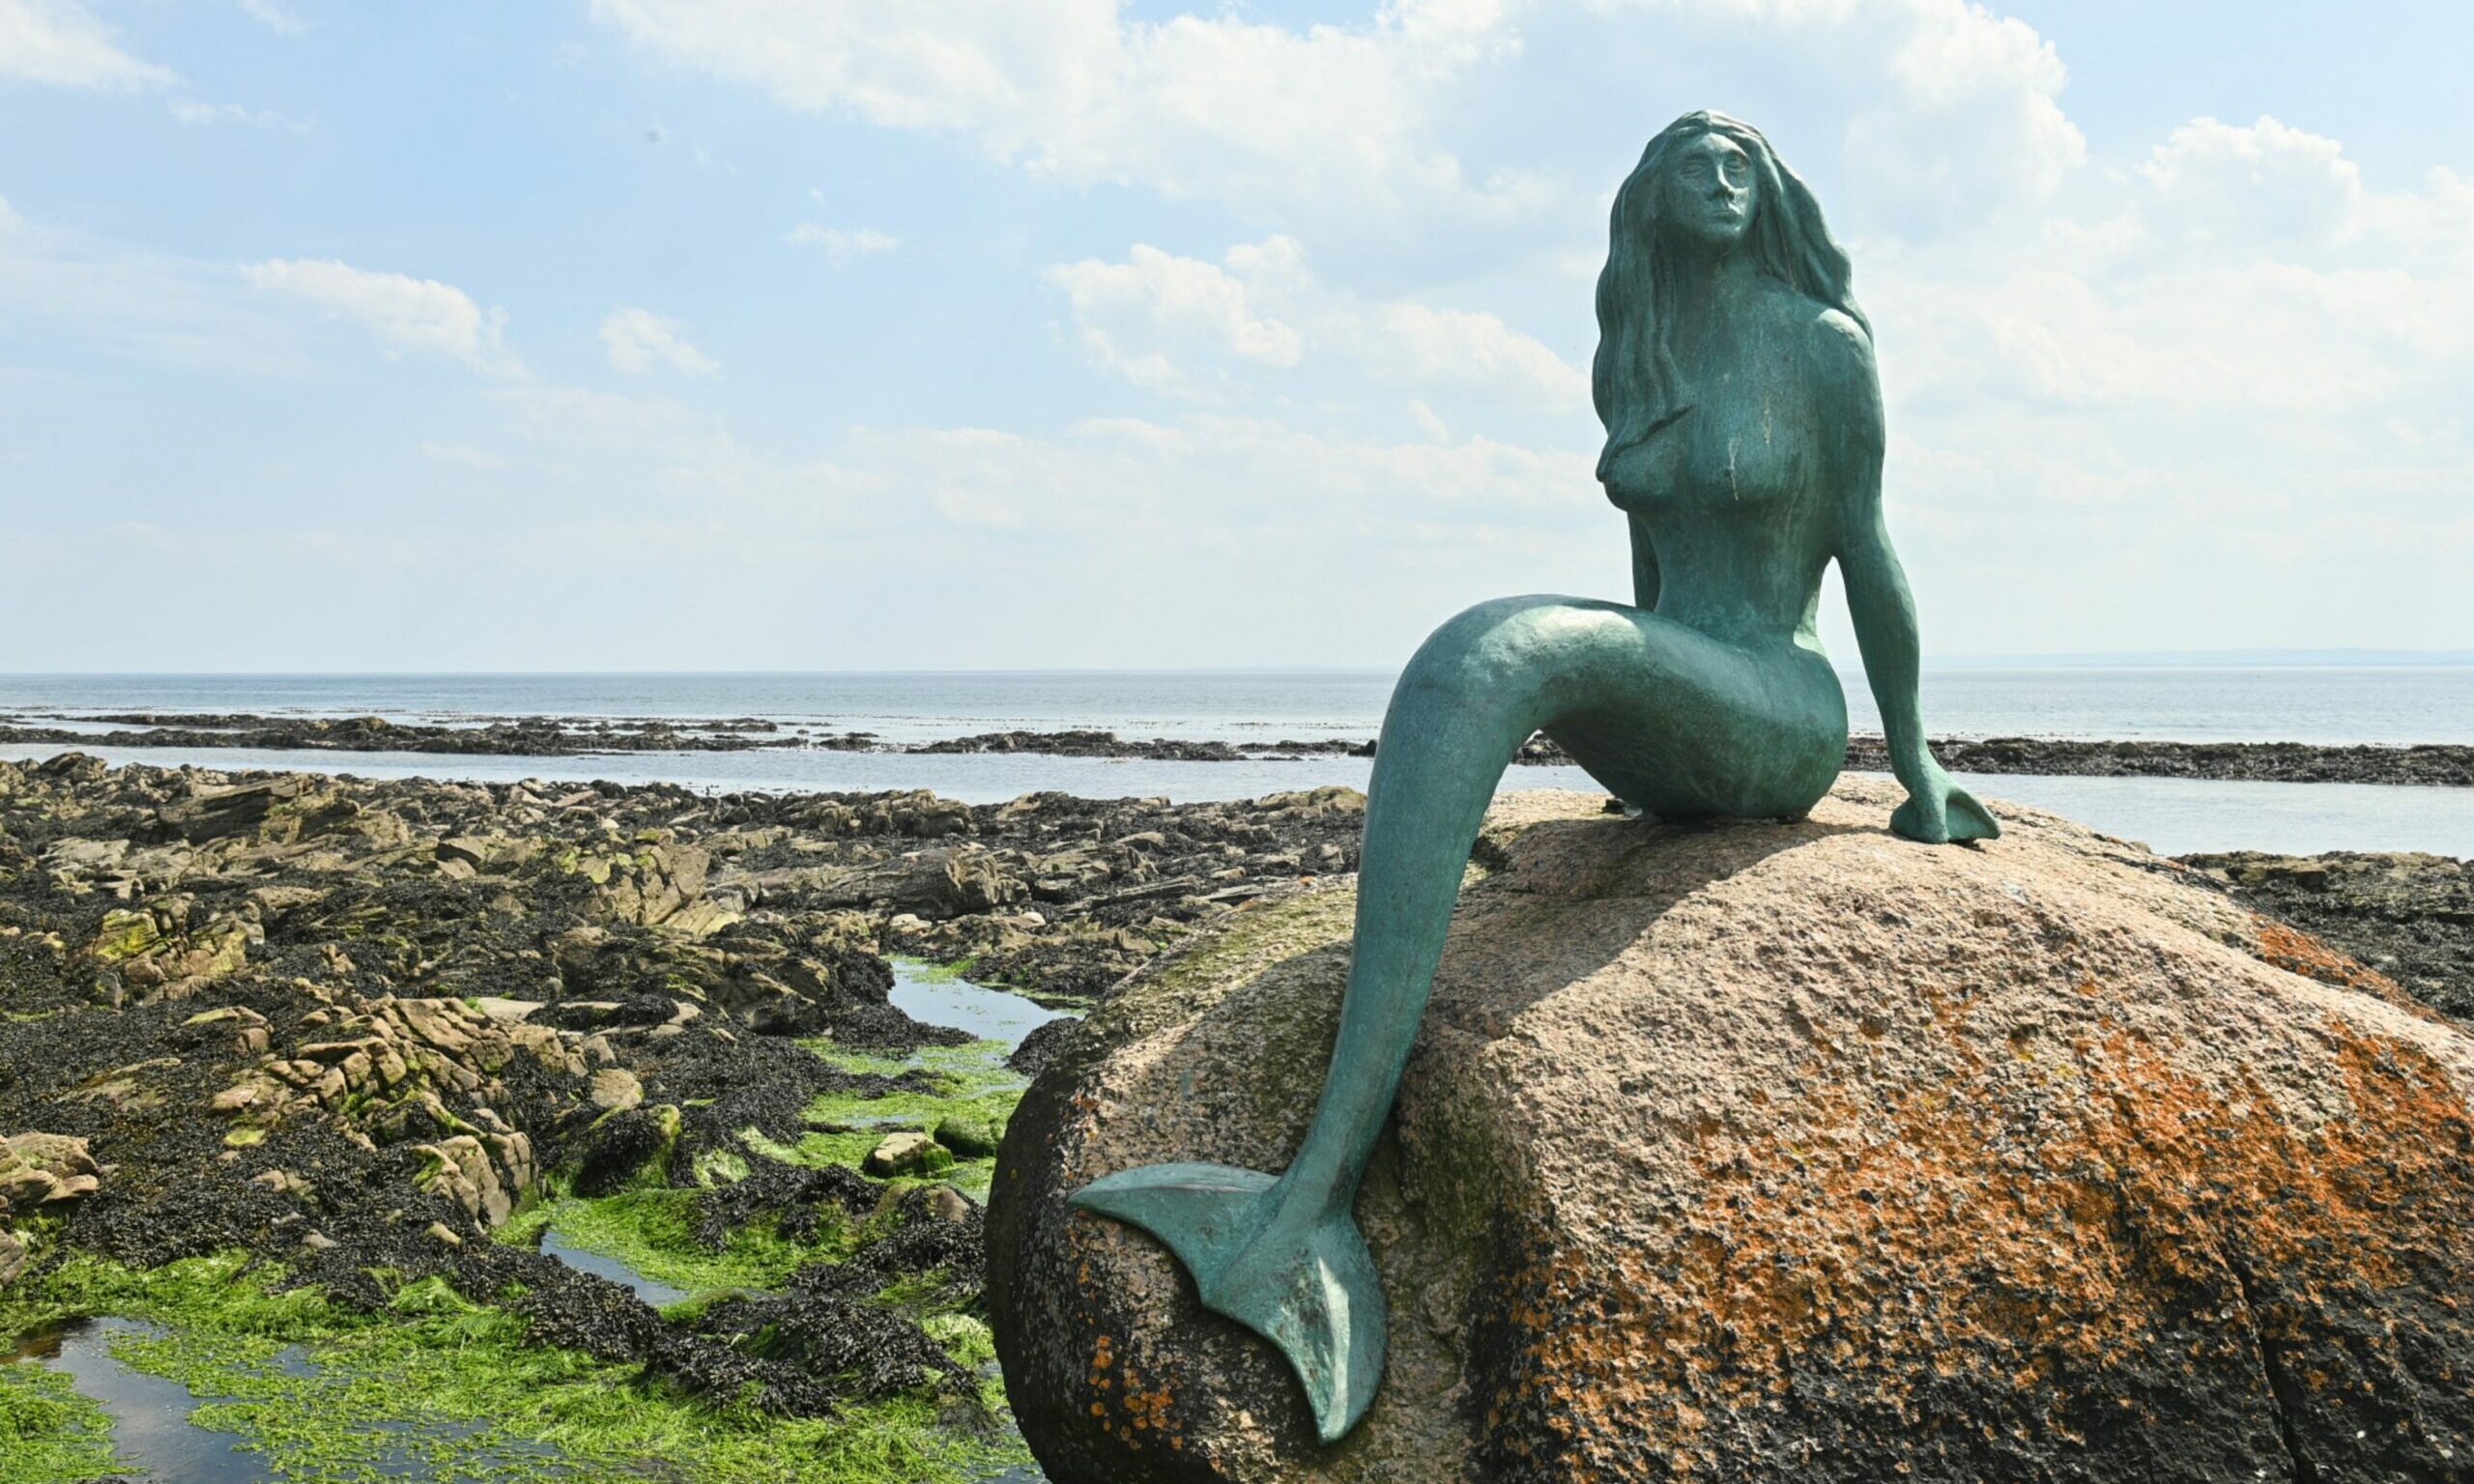 Mermaid of the North statue in Balintore. Picture by Jason Hedges.